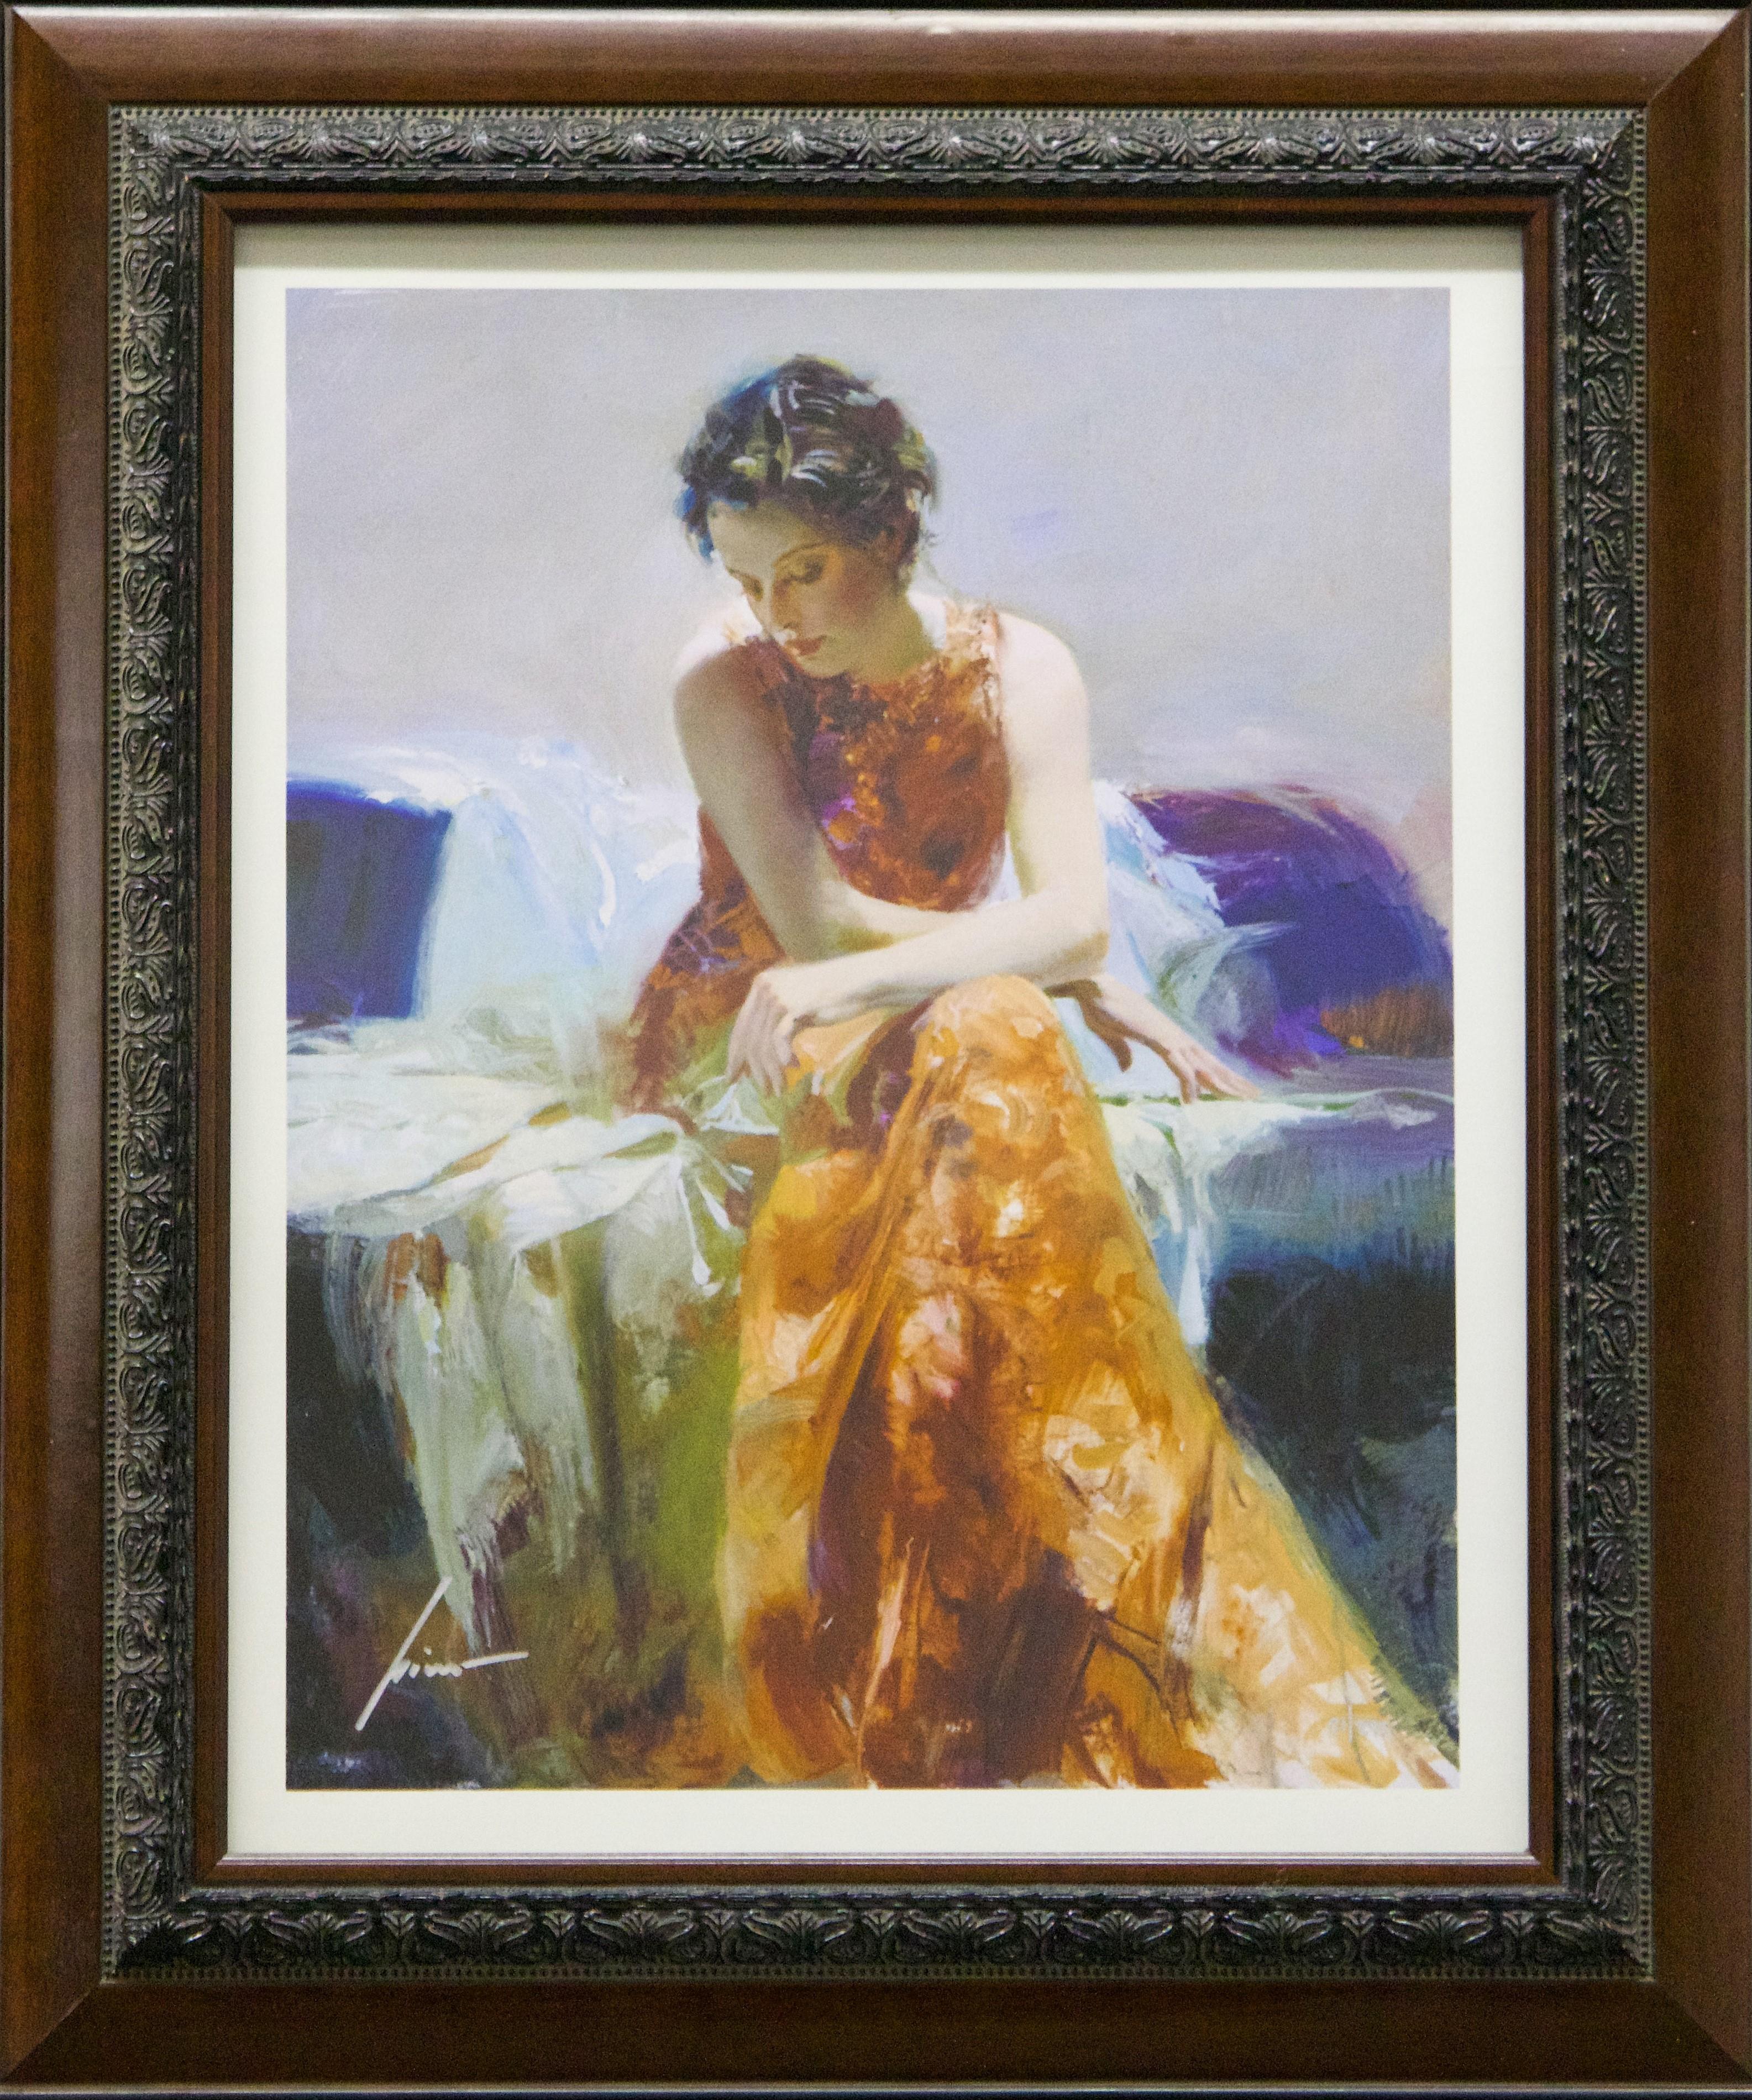 Pino Daeni Portrait Print - Solace-Framed Limited Edition Giclee on Paper, Signed by Artist